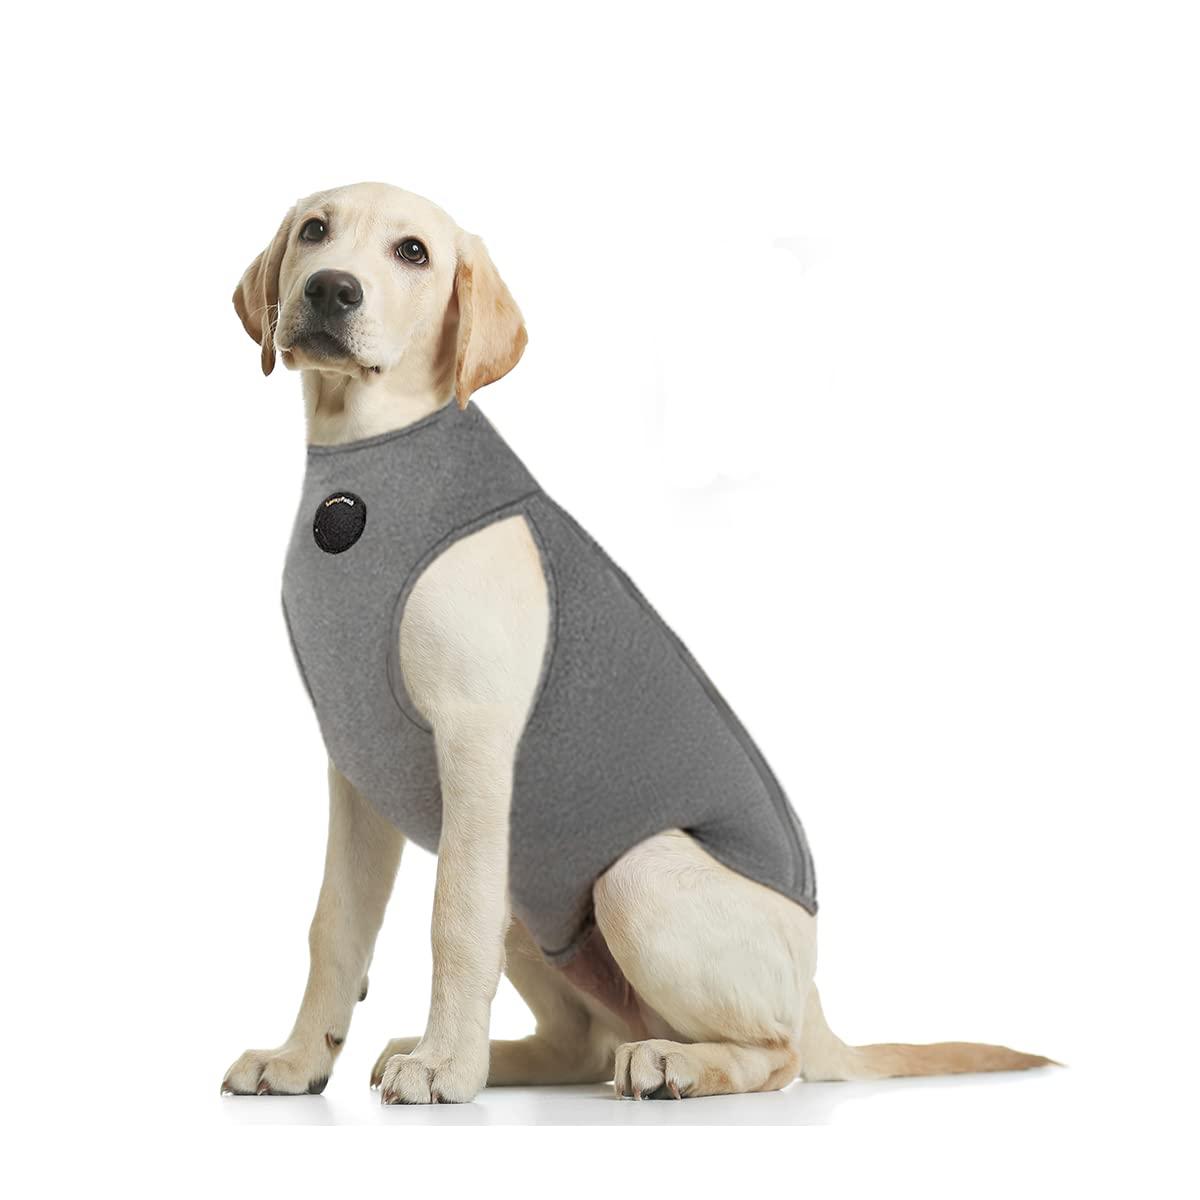 NeoAlly Upgraded Dog Surgical Recovery Suit Cone Alternative Onesie Post Surgery Wear Protects Abdominal Wounds and Skin Anti Licking, Aids Hot Spots, and Provides Anti Anxiety Relief - XS